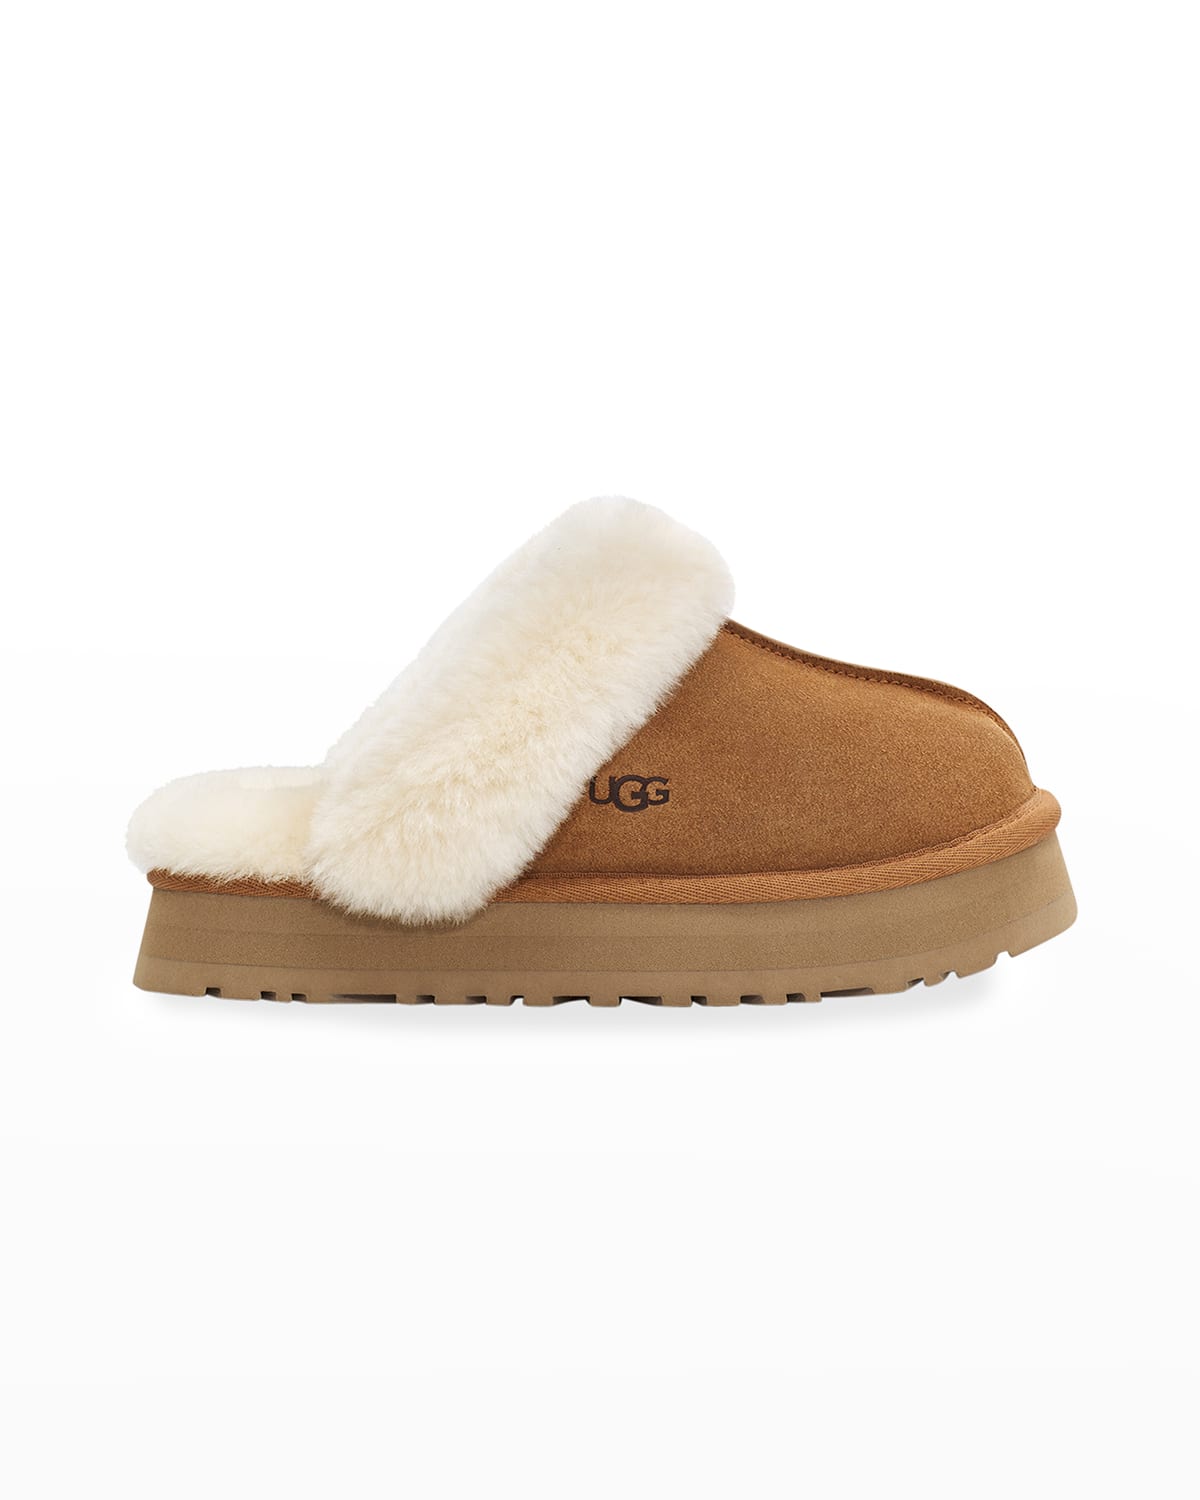 Disquette Suede & Shearling Platform Slippers | Neiman Marcus